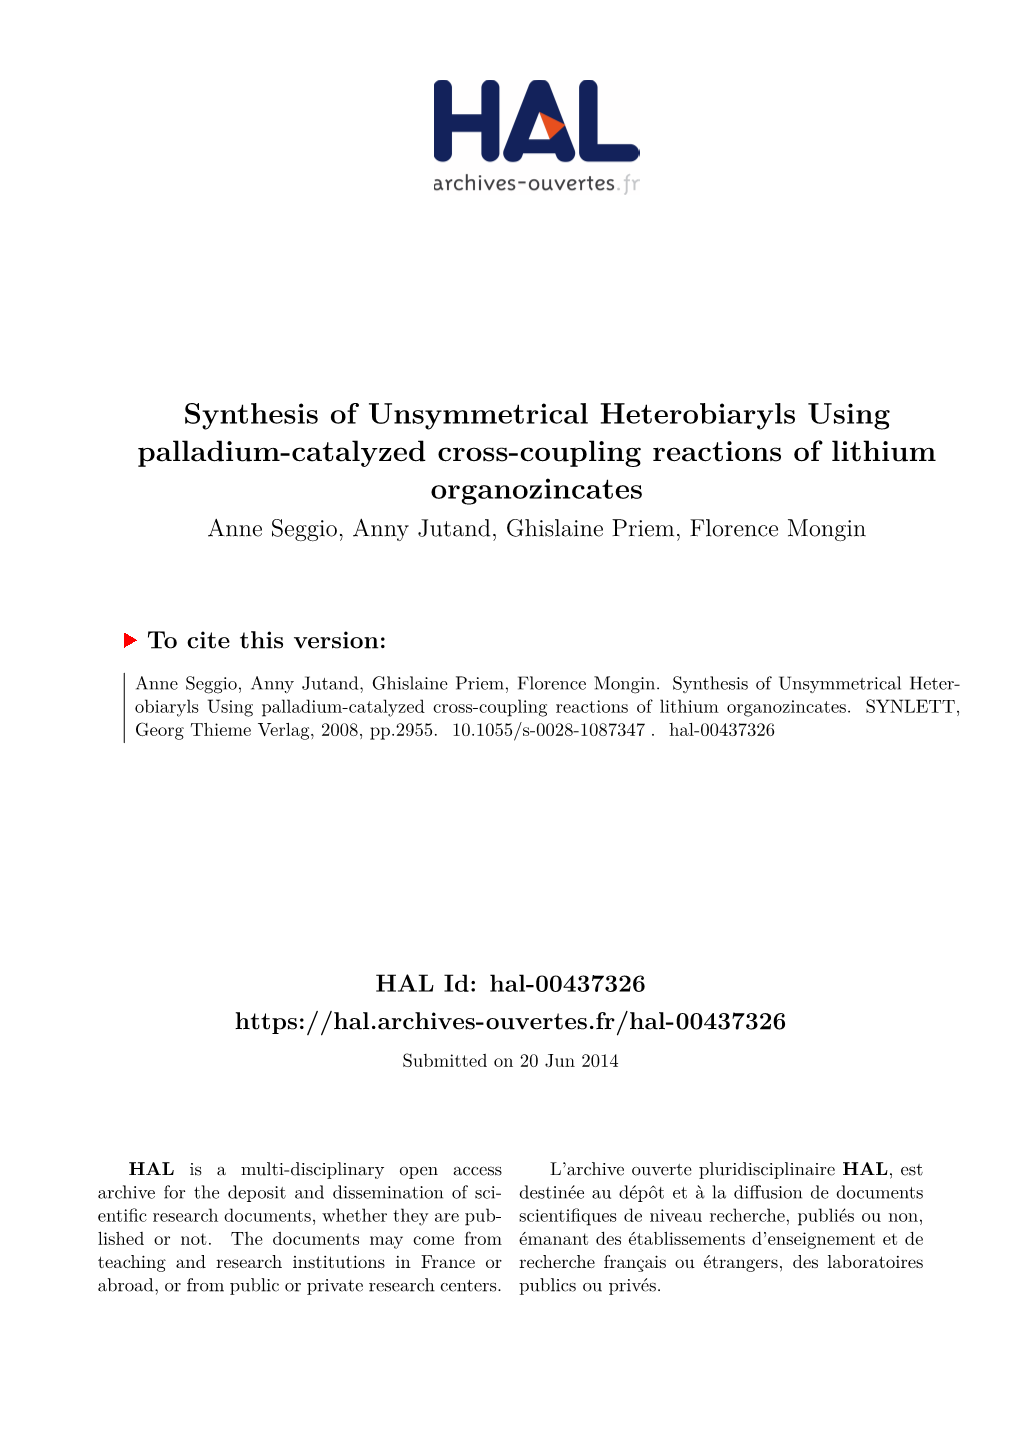 Synthesis of Unsymmetrical Heterobiaryls Using Palladium